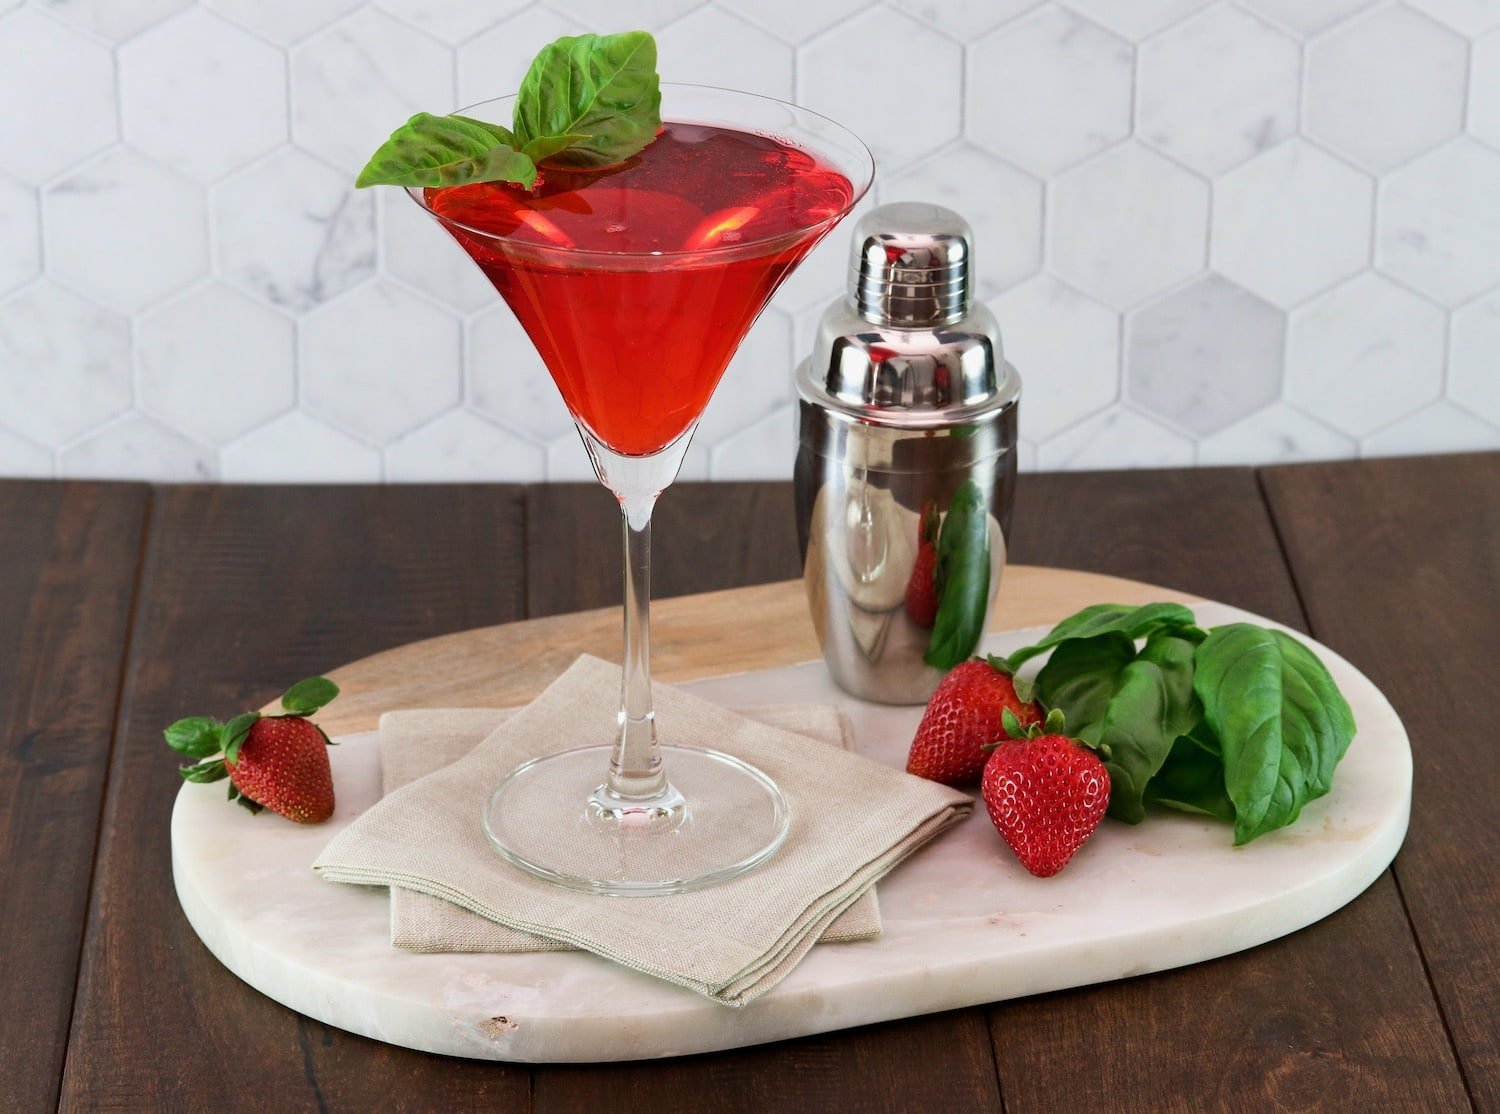 Horizontal shot of a strawberry basil cocktail in martini glass, garnished with a sprig of basil. A steel cocktail shaker sits off to the right side.